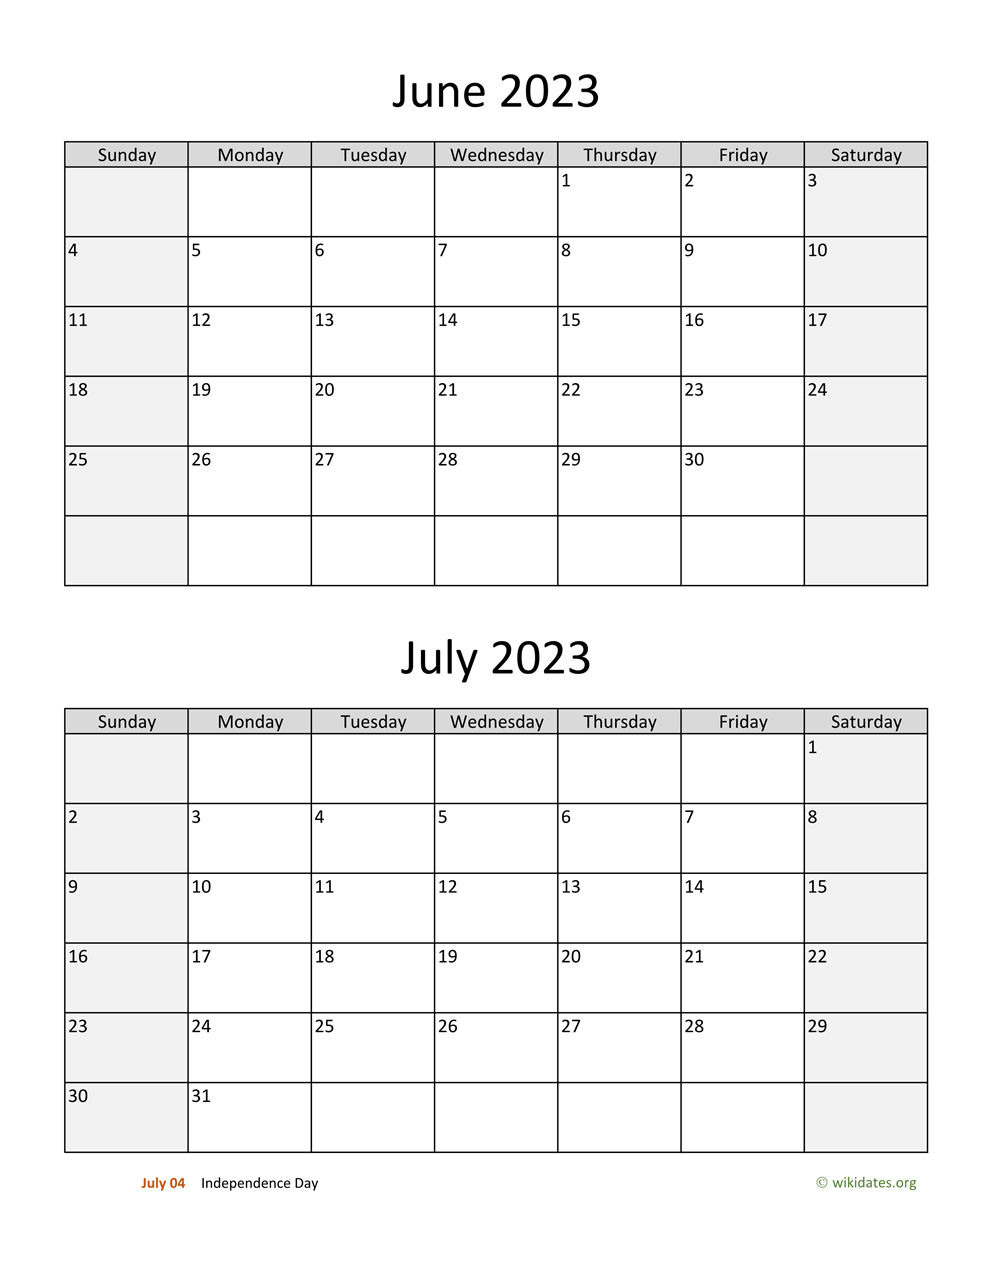 June and July 2023 Calendar | WikiDates.org